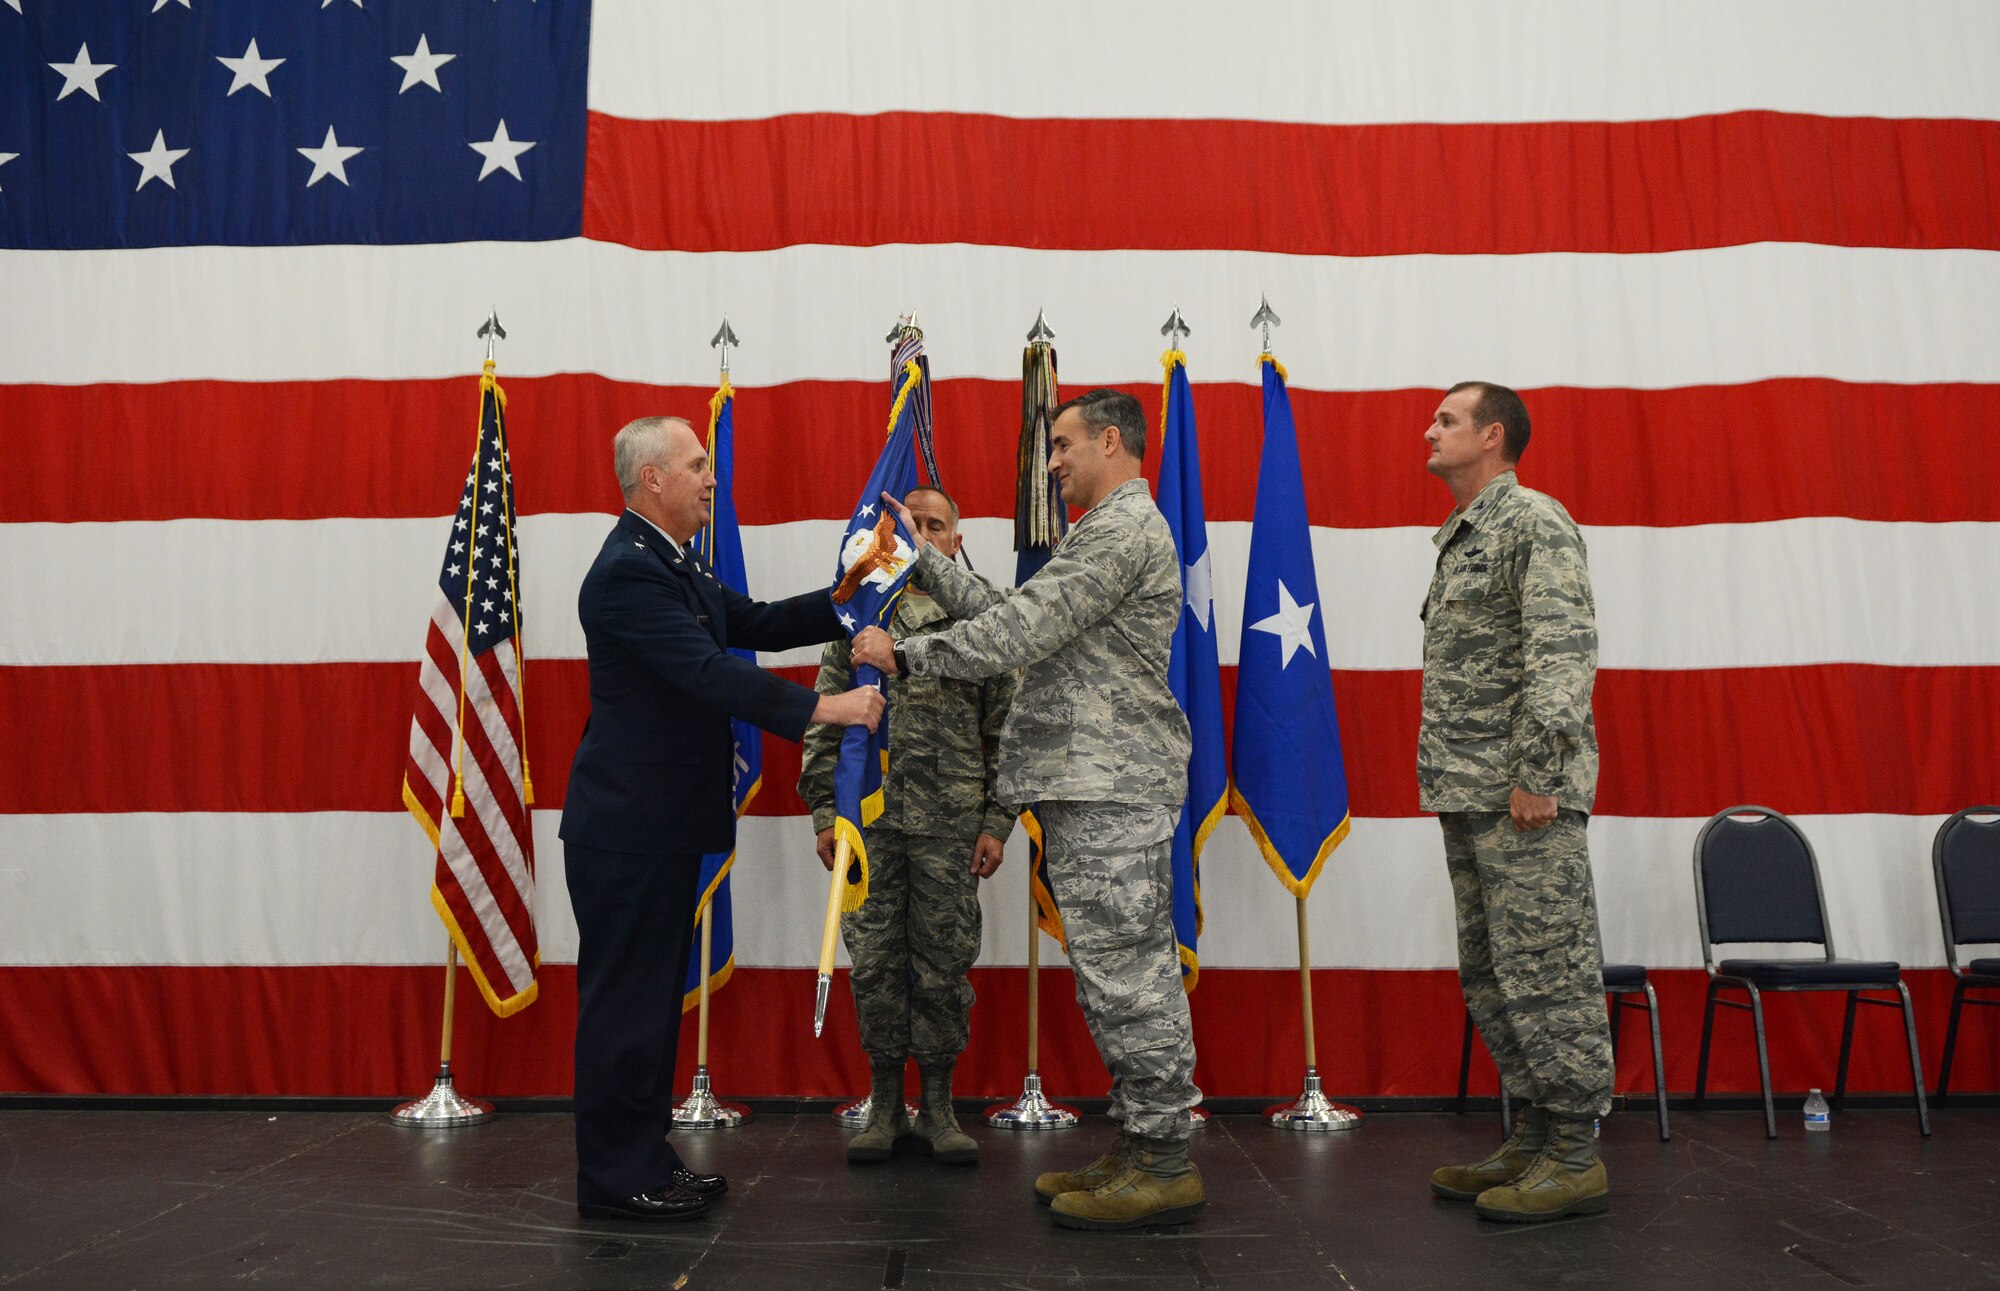 Maj. Gen. Donald P. Dunbar, Wisconsin adjutant general, passed the flag to Col. Erik Peterson, 115th Fighter Wing commander, during a wing change of command ceremony in hangar 406 Oct. 1, 2016. Airmen from the 115 FW attended the event to watch Col. Jeffrey J. Wiegand, former 115 FW commander, relinquish his command to Peterson. (U.S. Air National Guard photo by Staff Sgt. Kyle Russell)